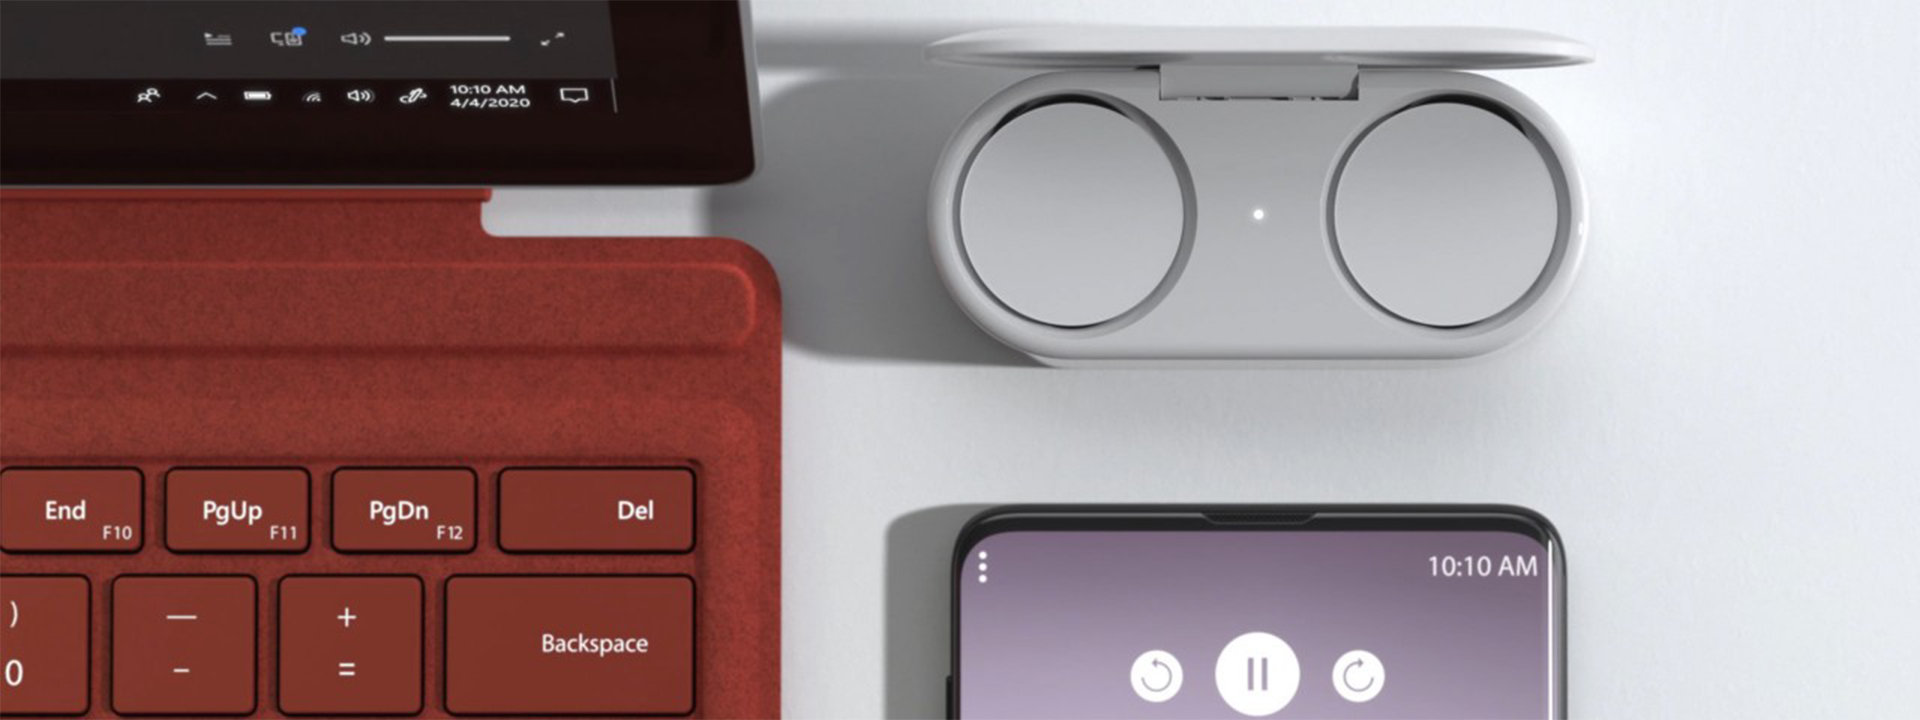 Surface Earbuds paired with a Surface device and a phone.